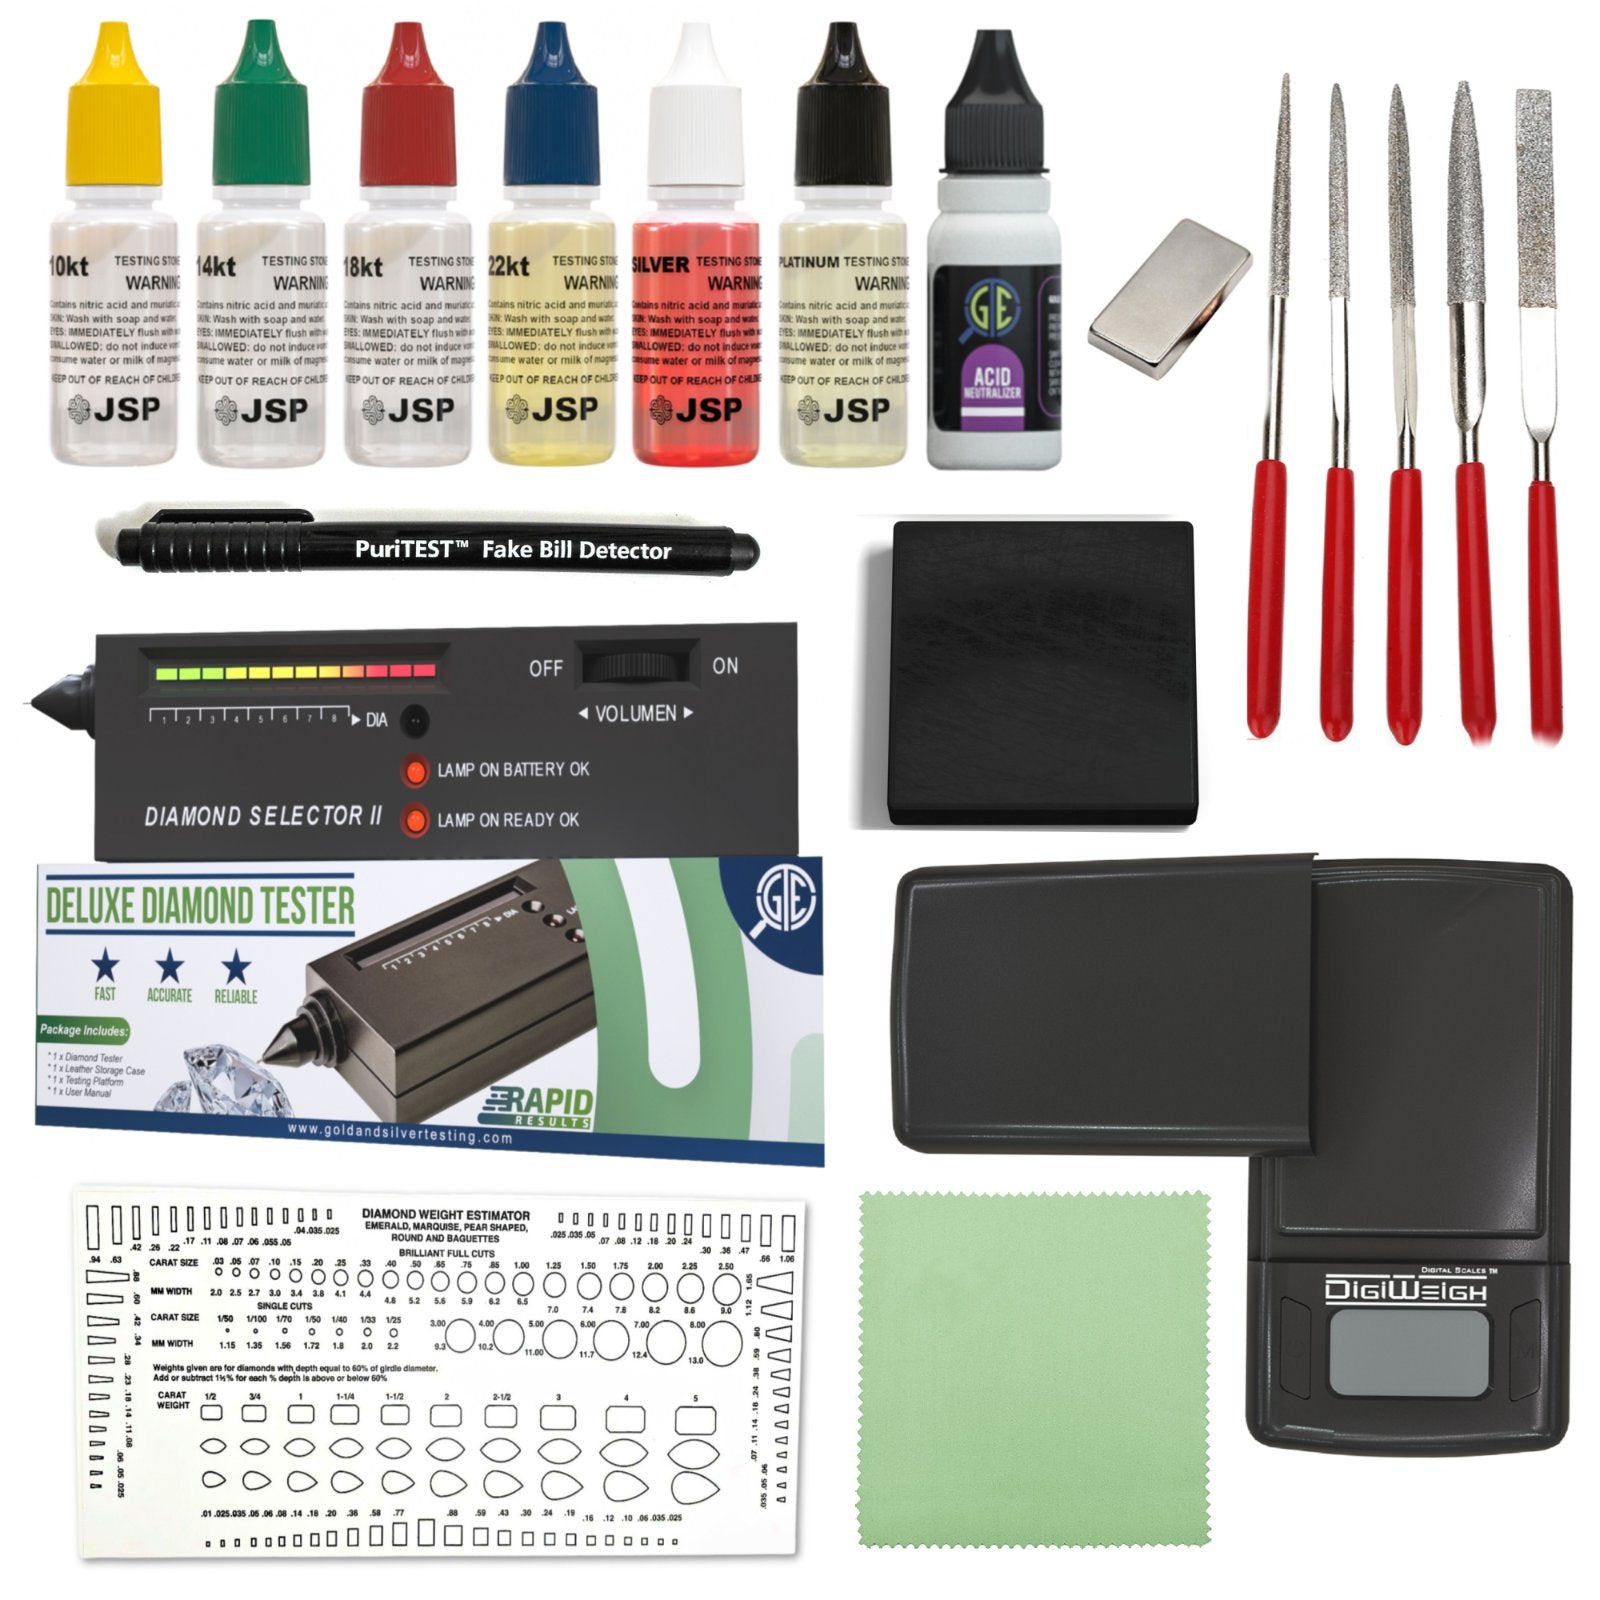 Professional Diamond Tester Pen - Jewelry Testing Kit for Real and Fake  Diamonds